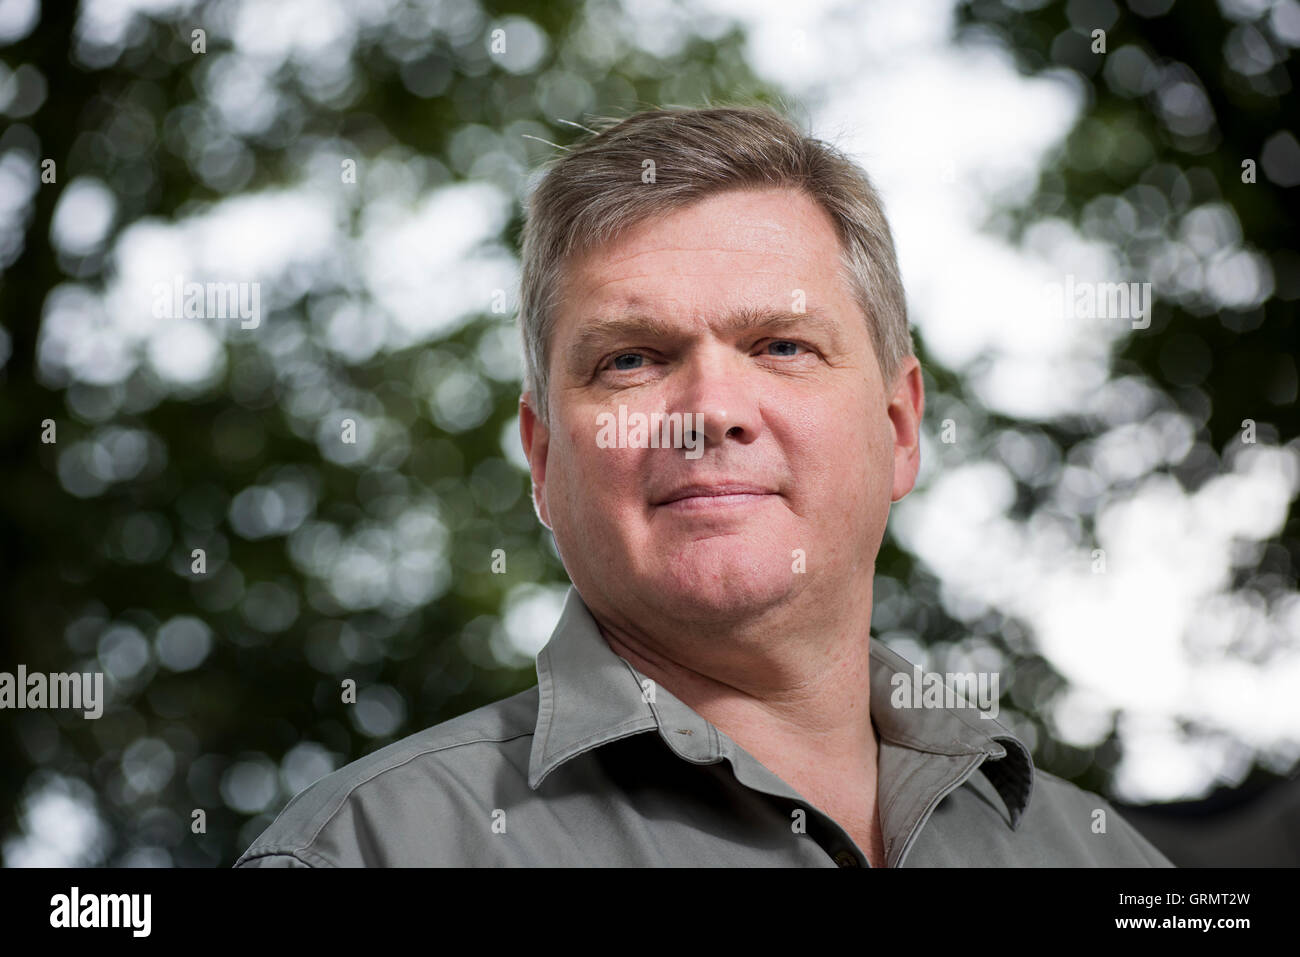 English woodsman, instructor, businessman, author and TV presenter Ray Mears. Stock Photo